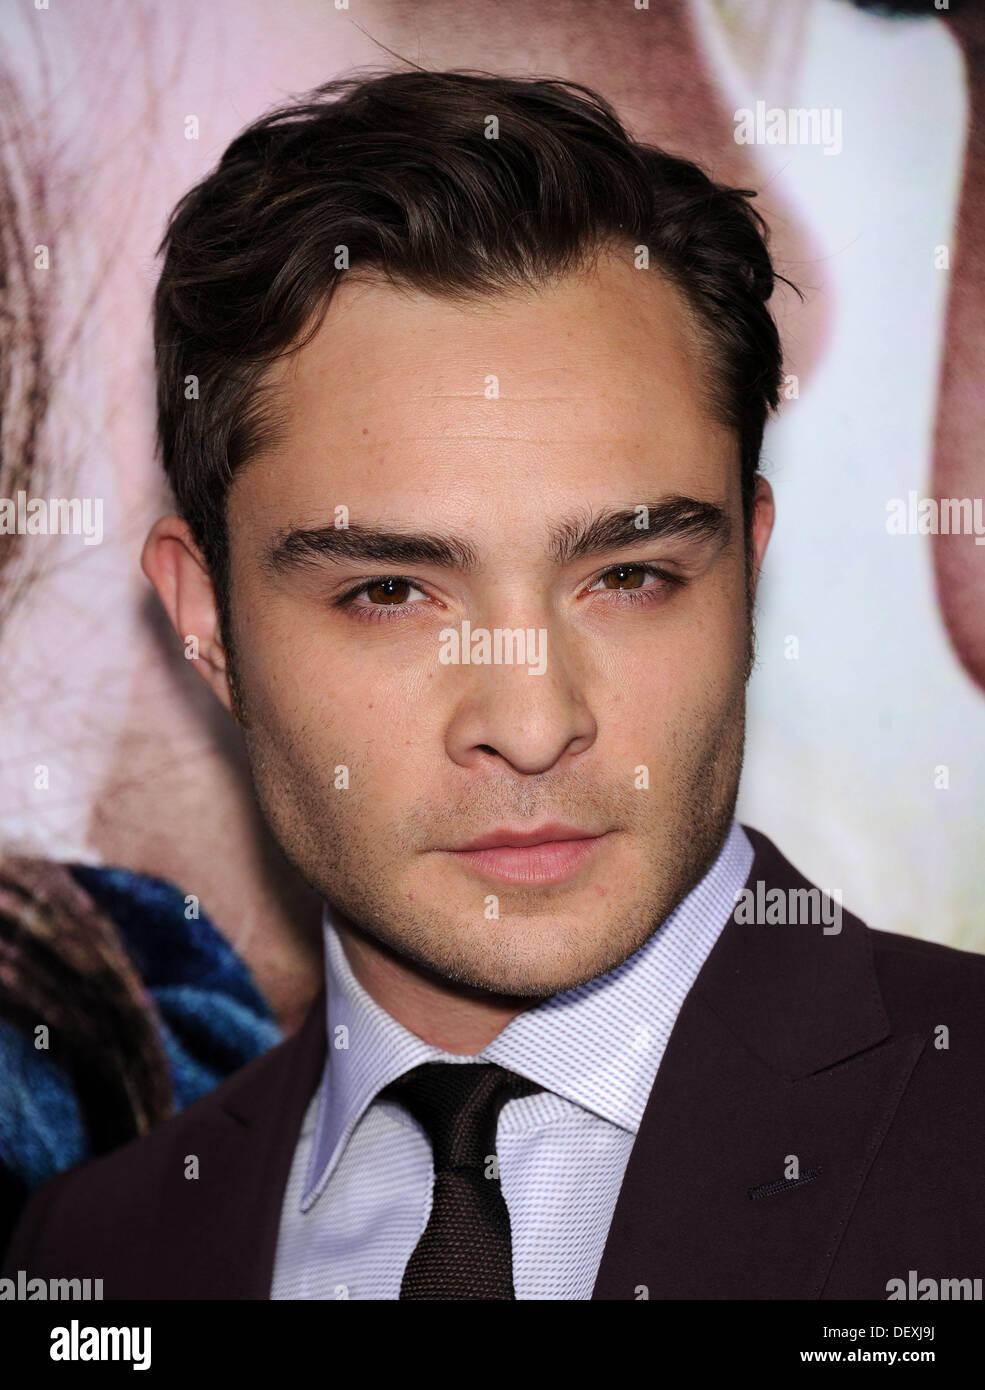 Hollywood, California, USA. 24th Sep, 2013. Ed Westwick arrives for the premiere of the film 'Romeo & Juliet' at the Arclight theater. © Lisa O'Connor/ZUMAPRESS.com/Alamy Live News Stock Photo